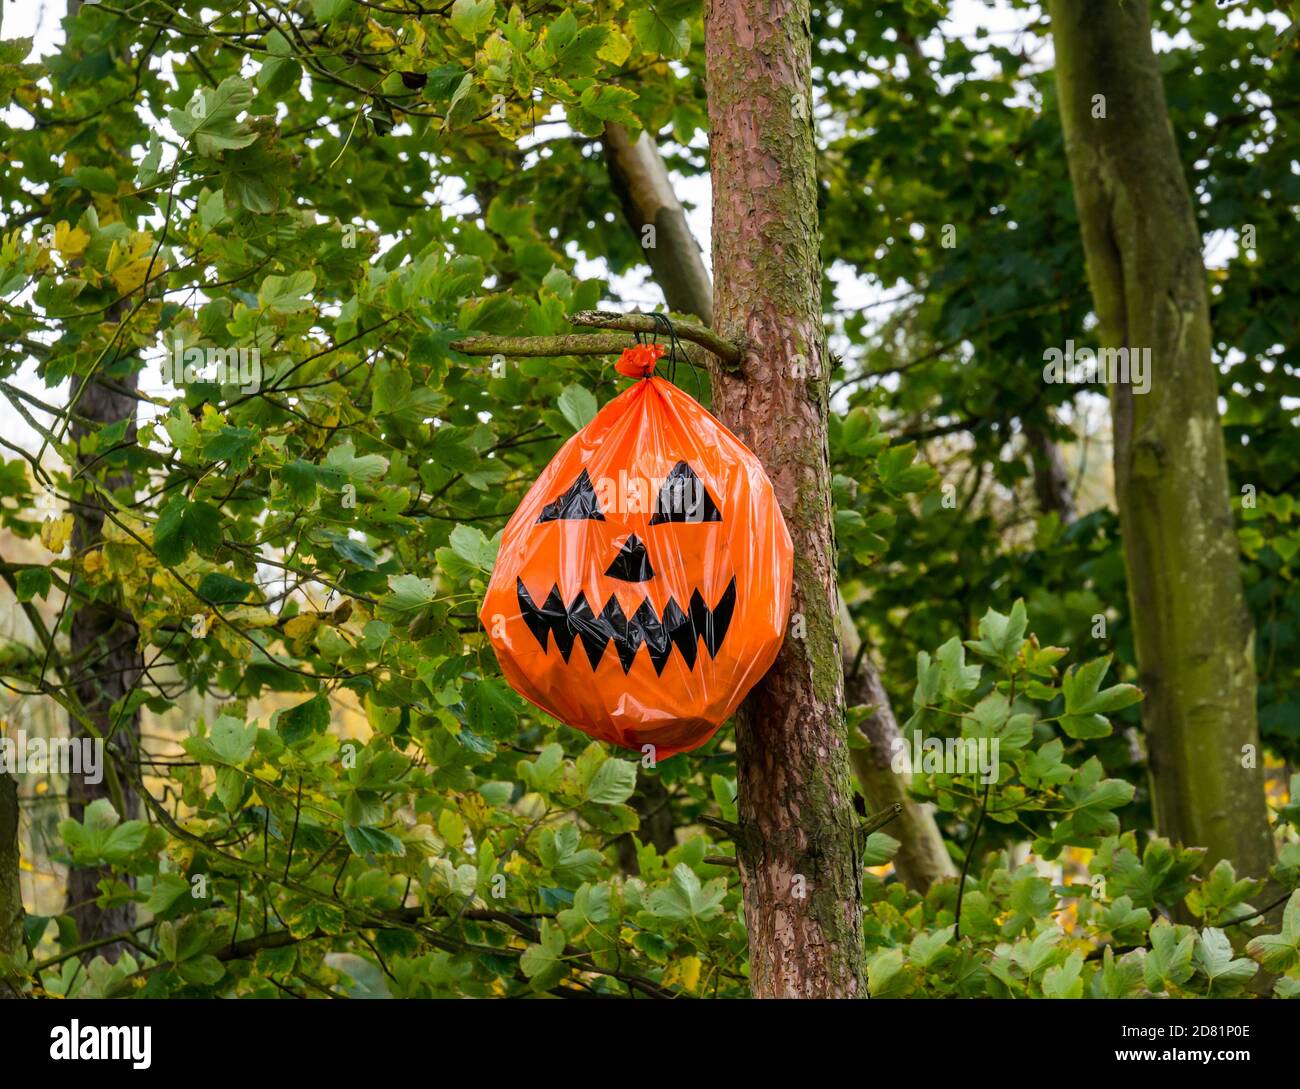 Spooky woodland Halloween trail with a pumpkin face made out of a plastic bag hanging in a tree, Balgone Estate, East Lothian, Scotland, UK Stock Photo